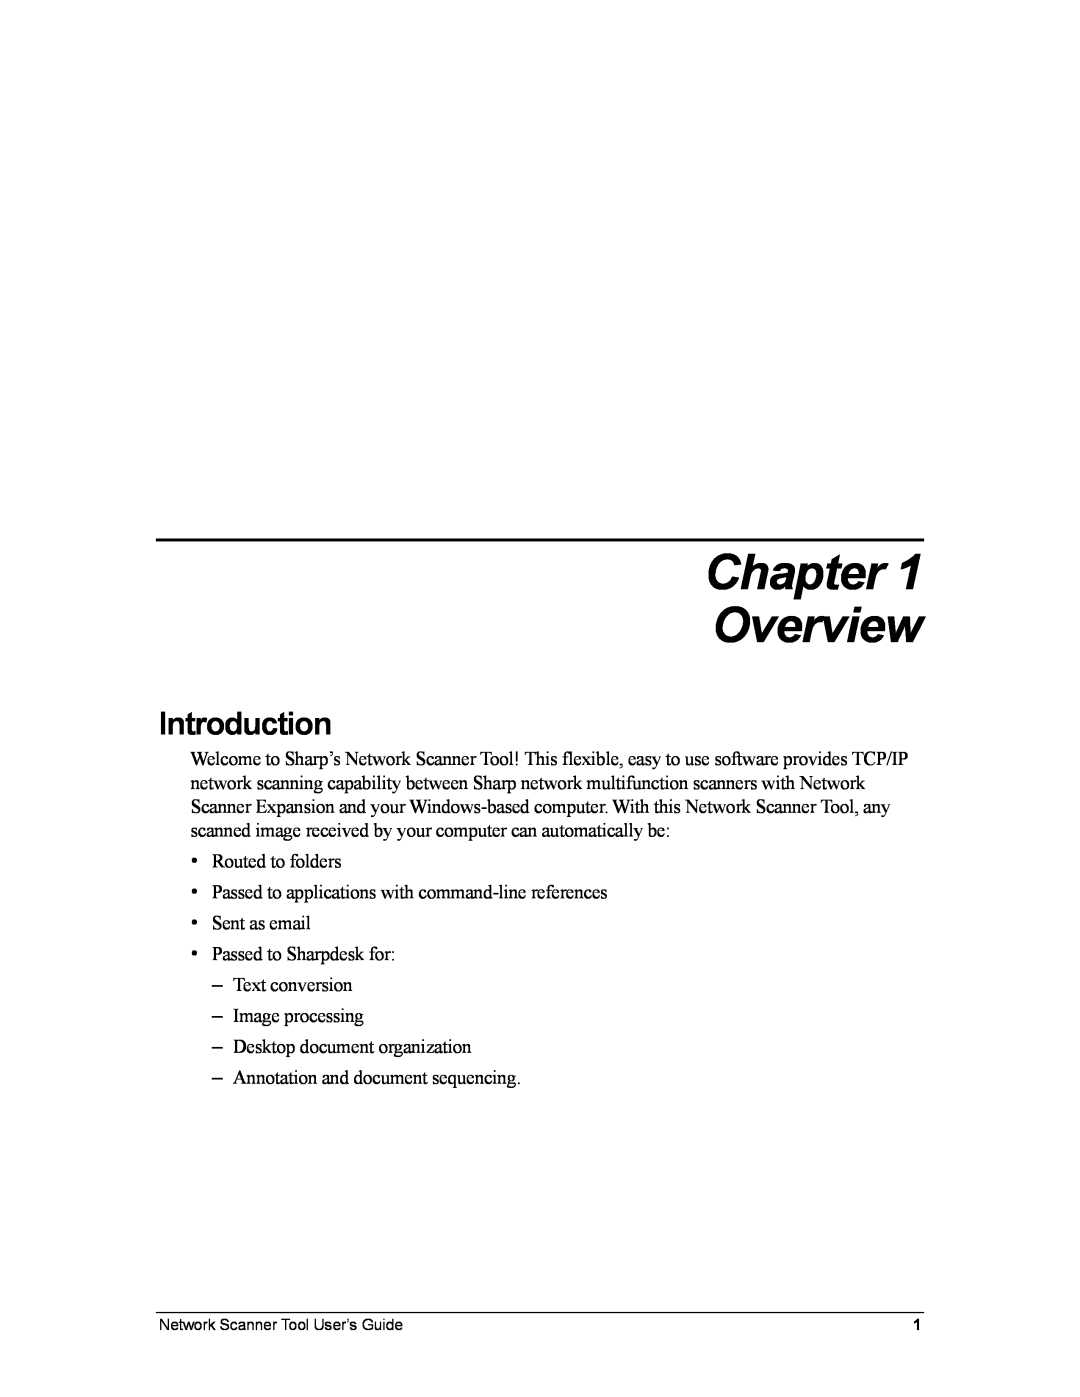 Sharp R3.1 manual Chapter Overview, Introduction 